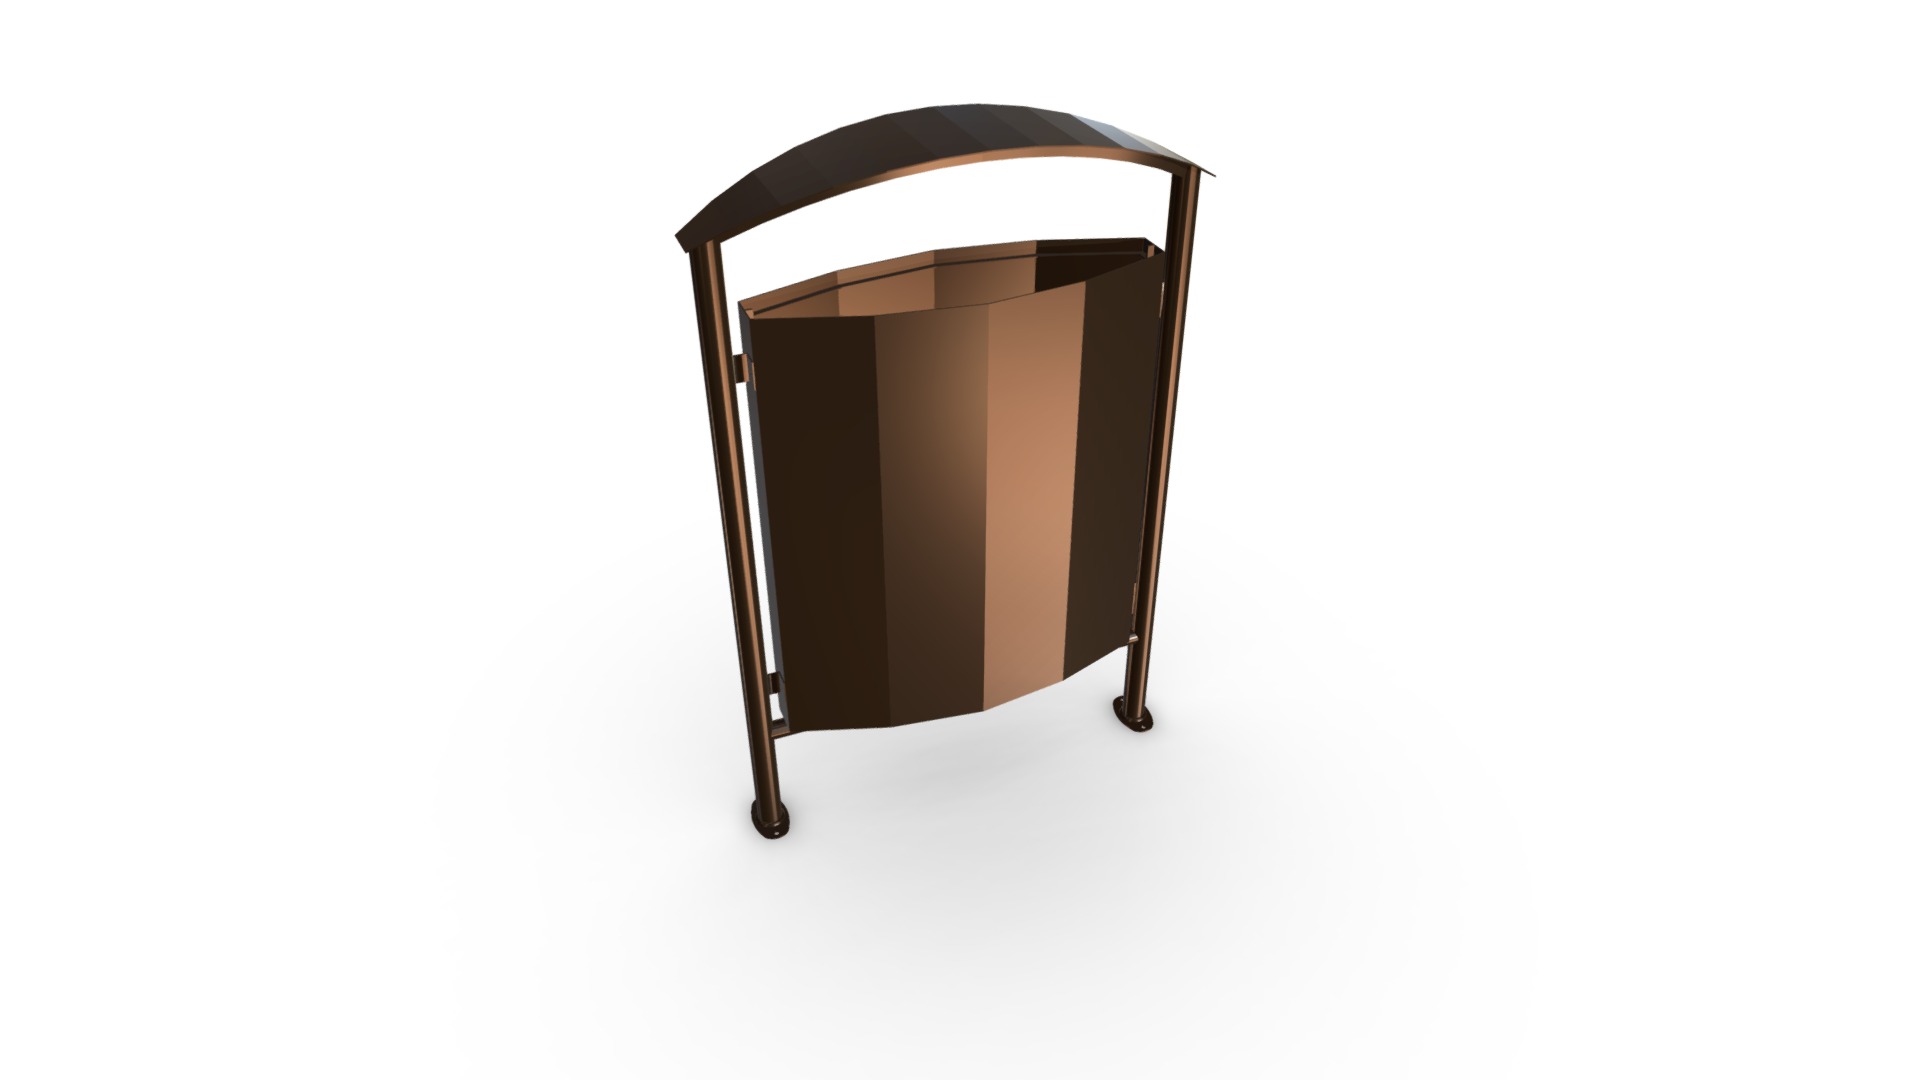 3D model UM-12 - This is a 3D model of the UM-12. The 3D model is about a black chair with a cushion.